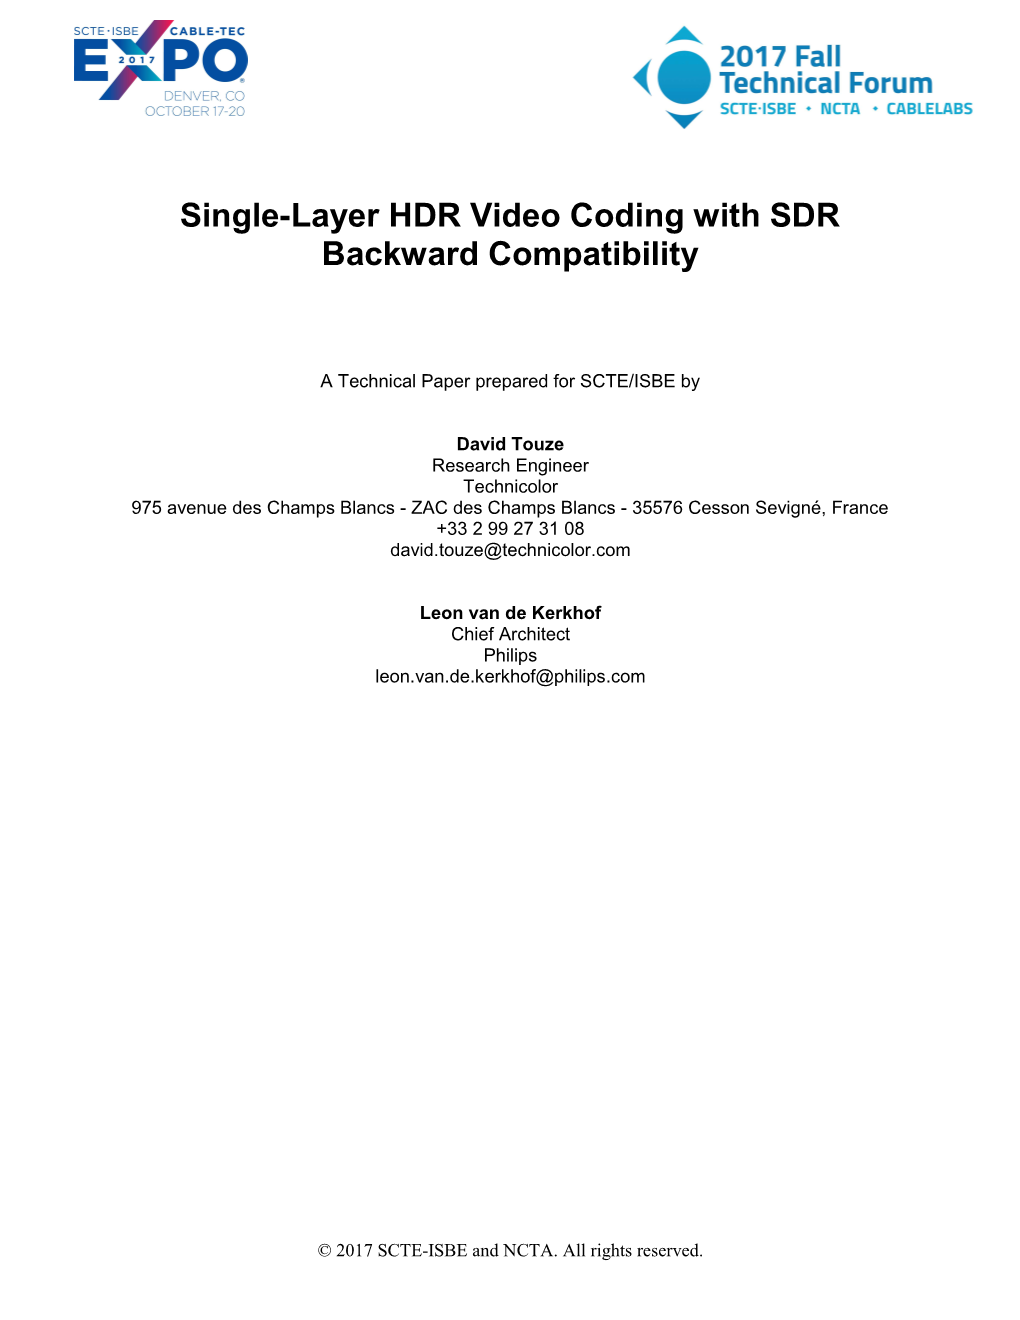 Single-Layer HDR Video Coding with SDR Backward Compatibility